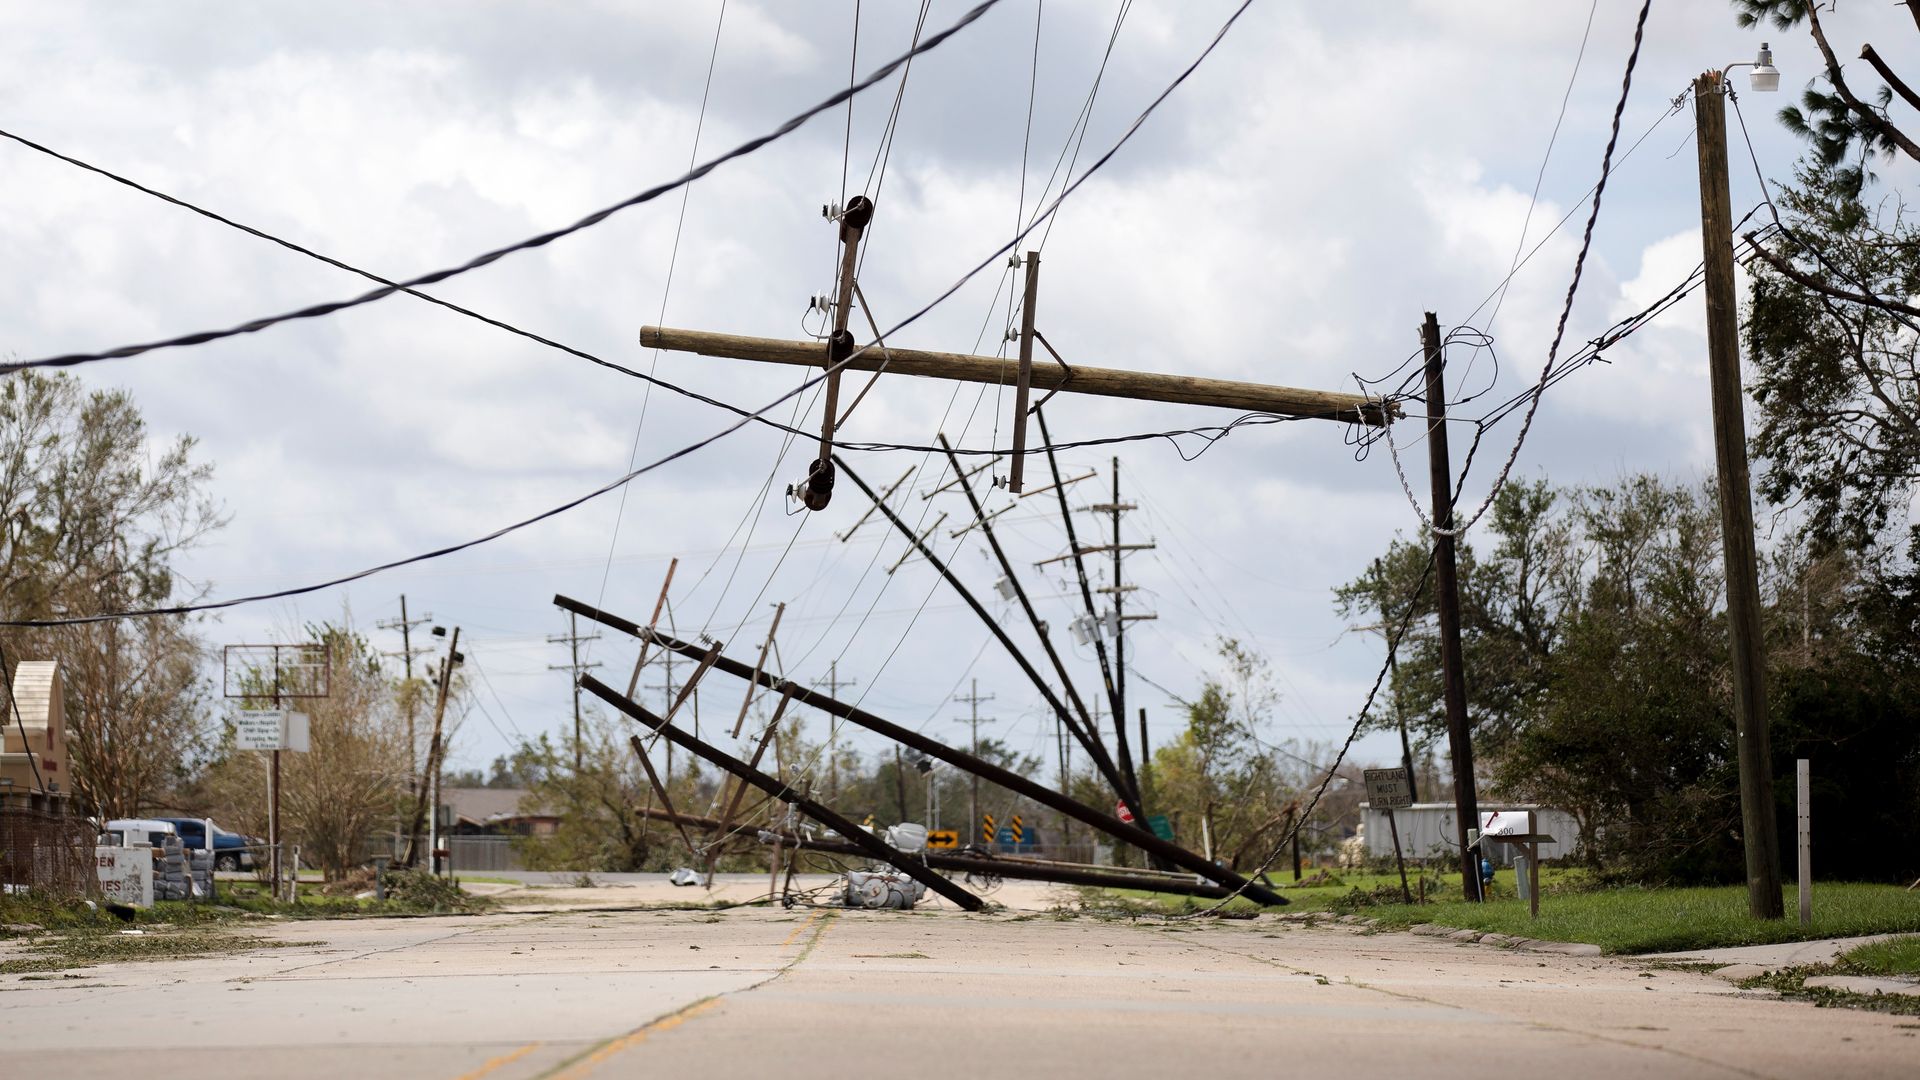 Power lines tipping over to the side after a hurricane.